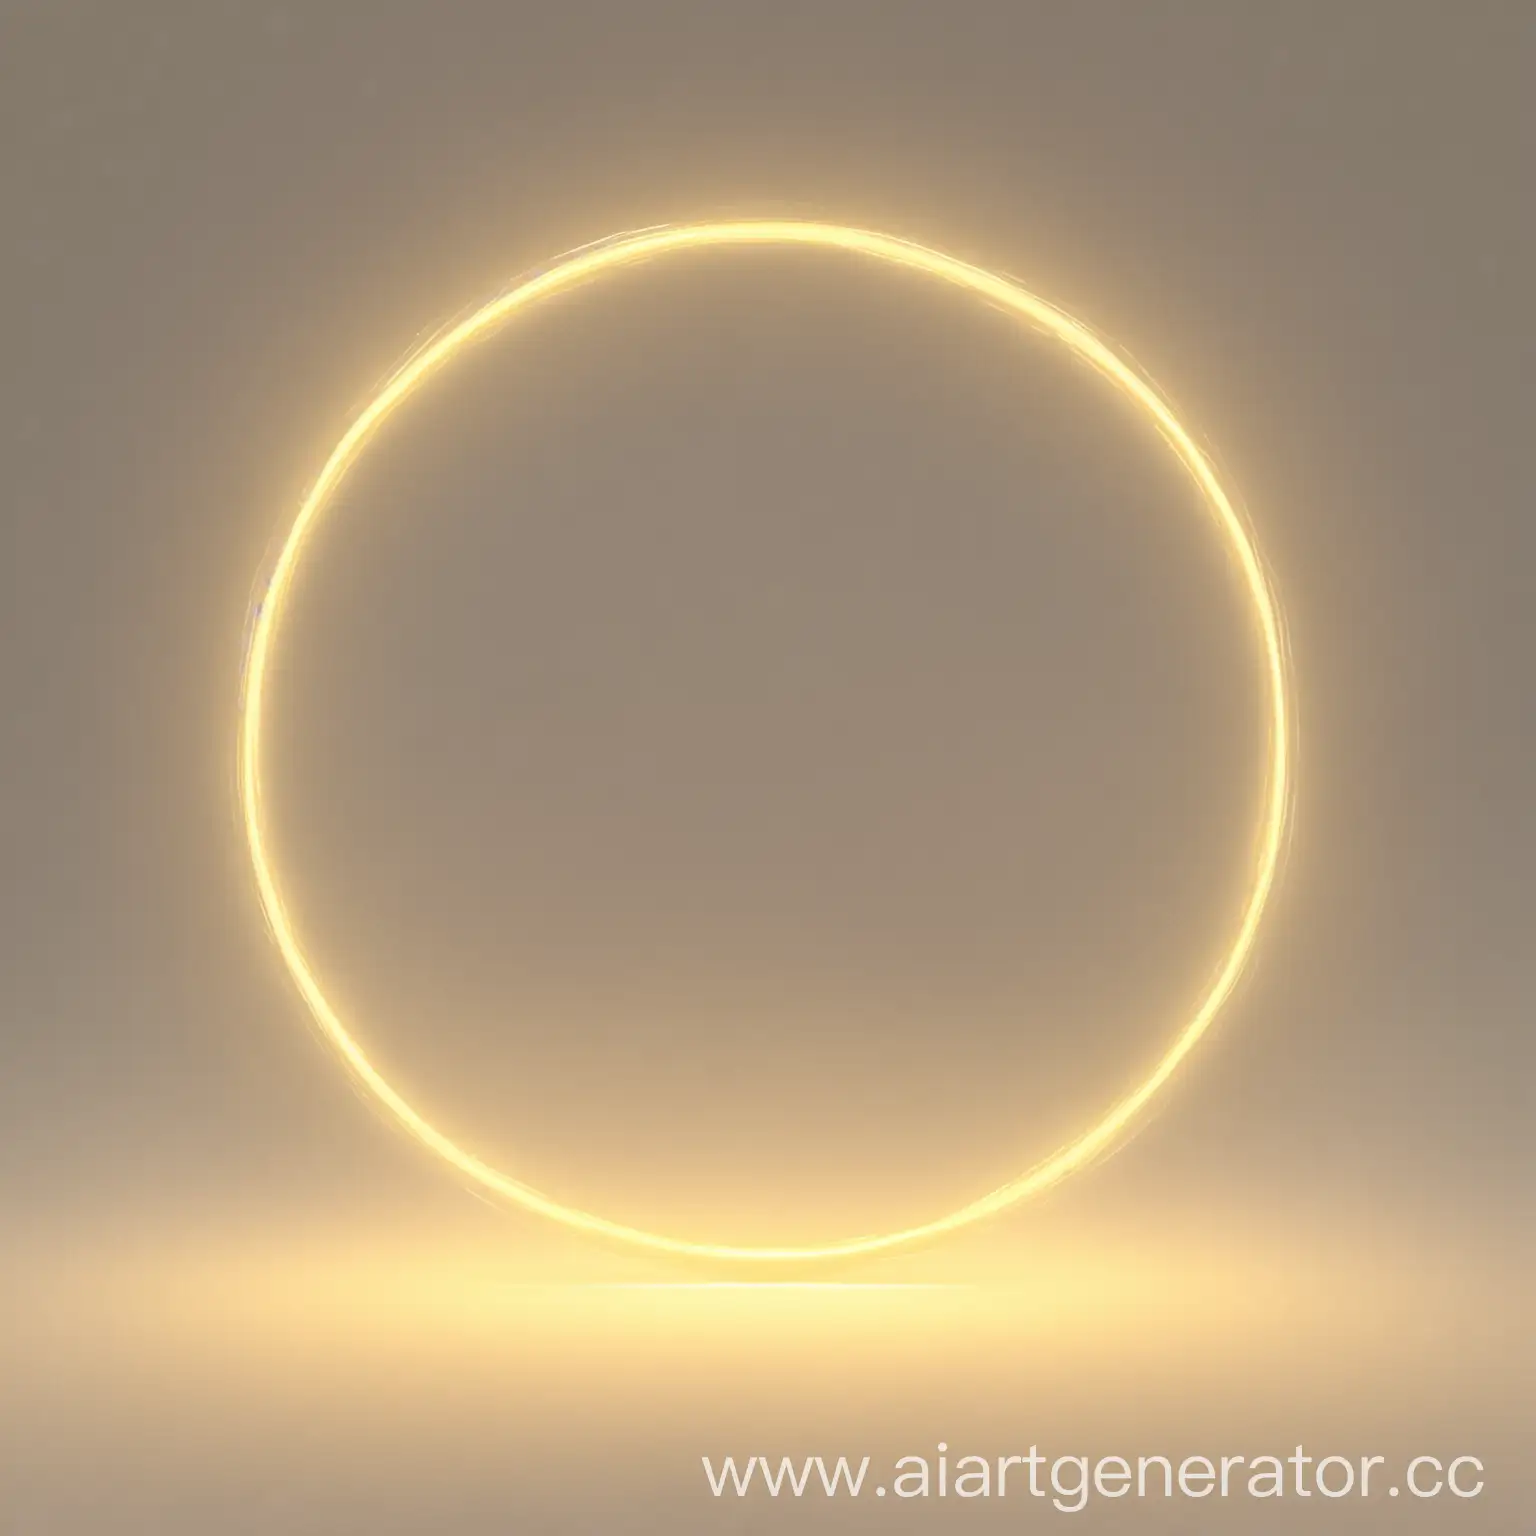 Very light ONE FILLED geometric shape A SMOOTH yellow CIRCLE FILLED